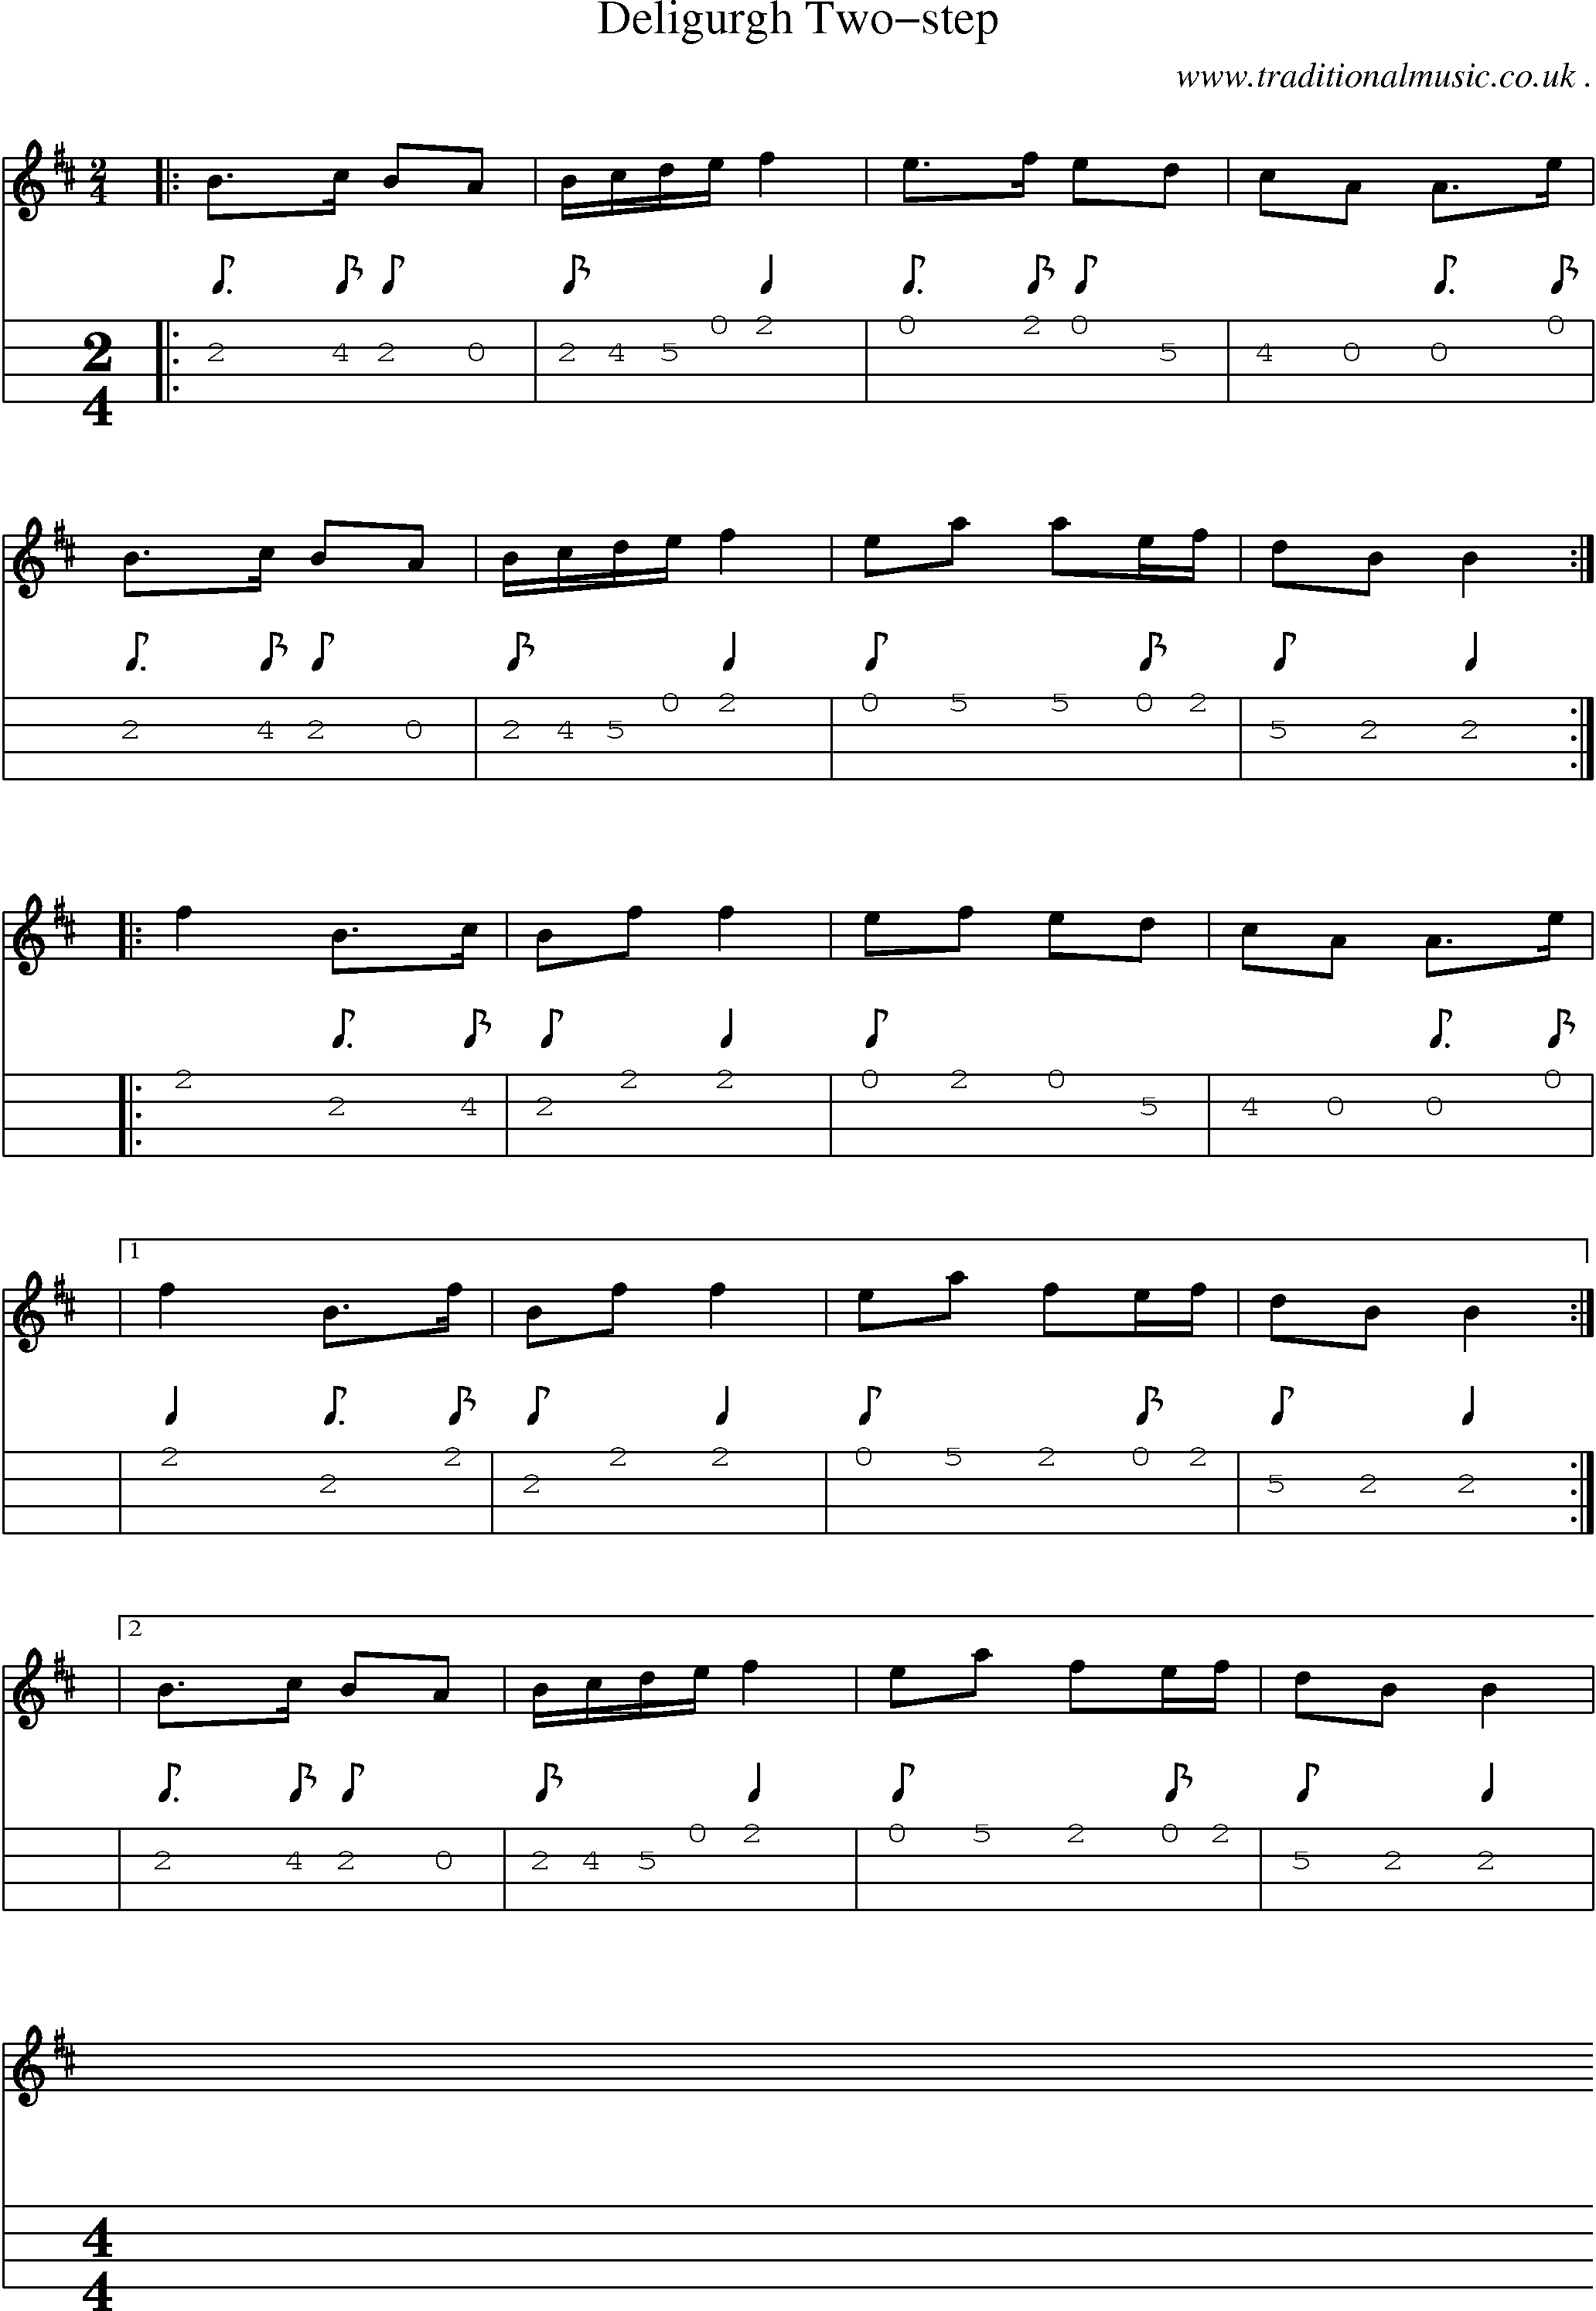 Sheet-Music and Mandolin Tabs for Deligurgh Two-step